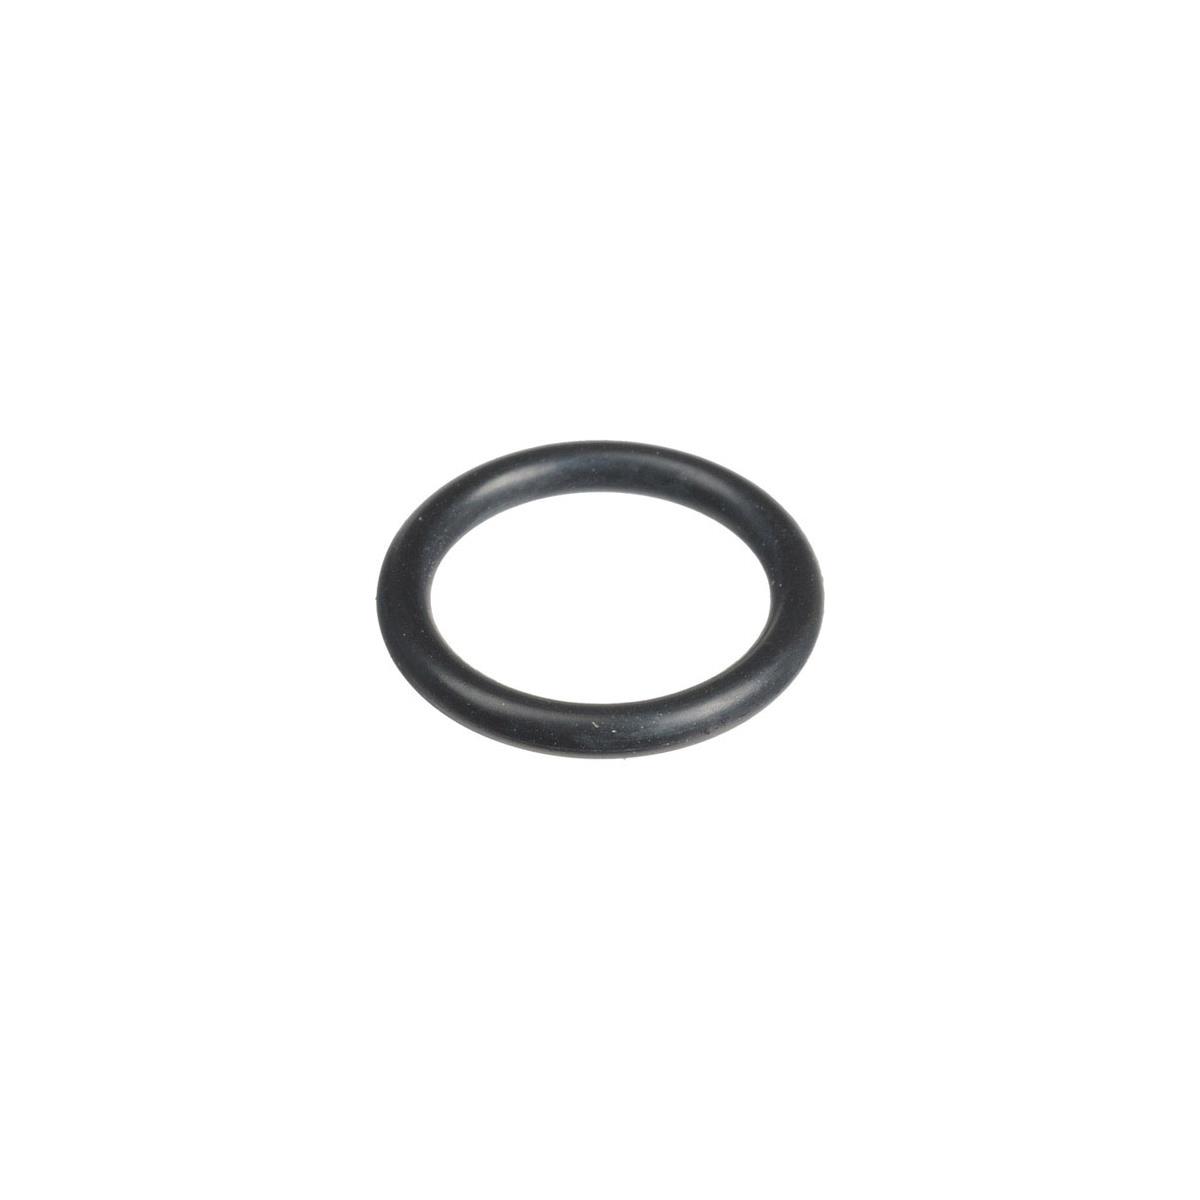 

Ikelite Replacement O-Ring for Nikonos End Sync Cord